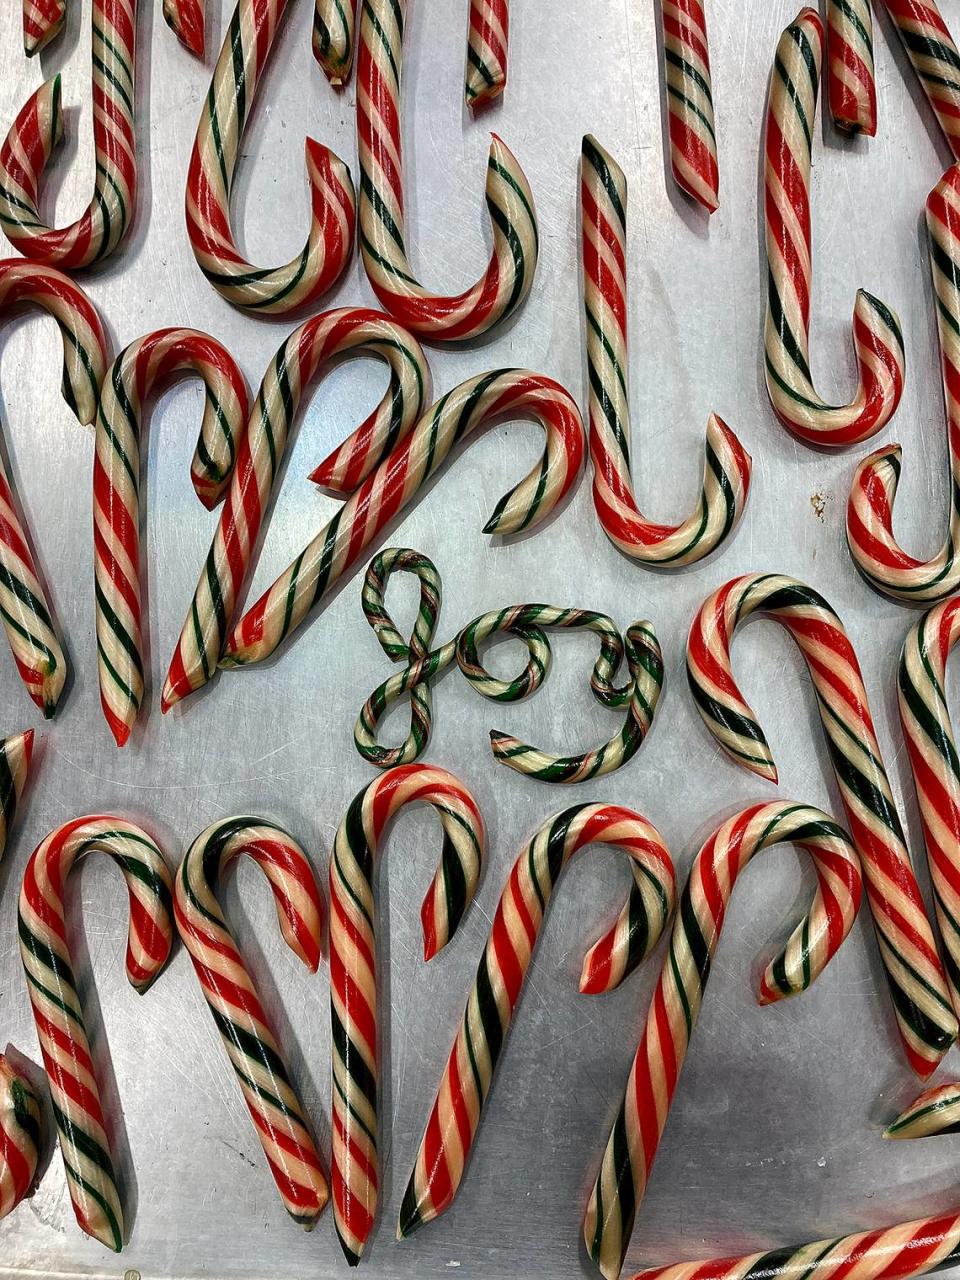 Peter Vrinios makes candy canes atop his family’s antique candy table at the Fudge Factory in Bradenton Beach. Vrinios’ family has been making candy for four generations and has been putting on a candy show during the holidays. provided